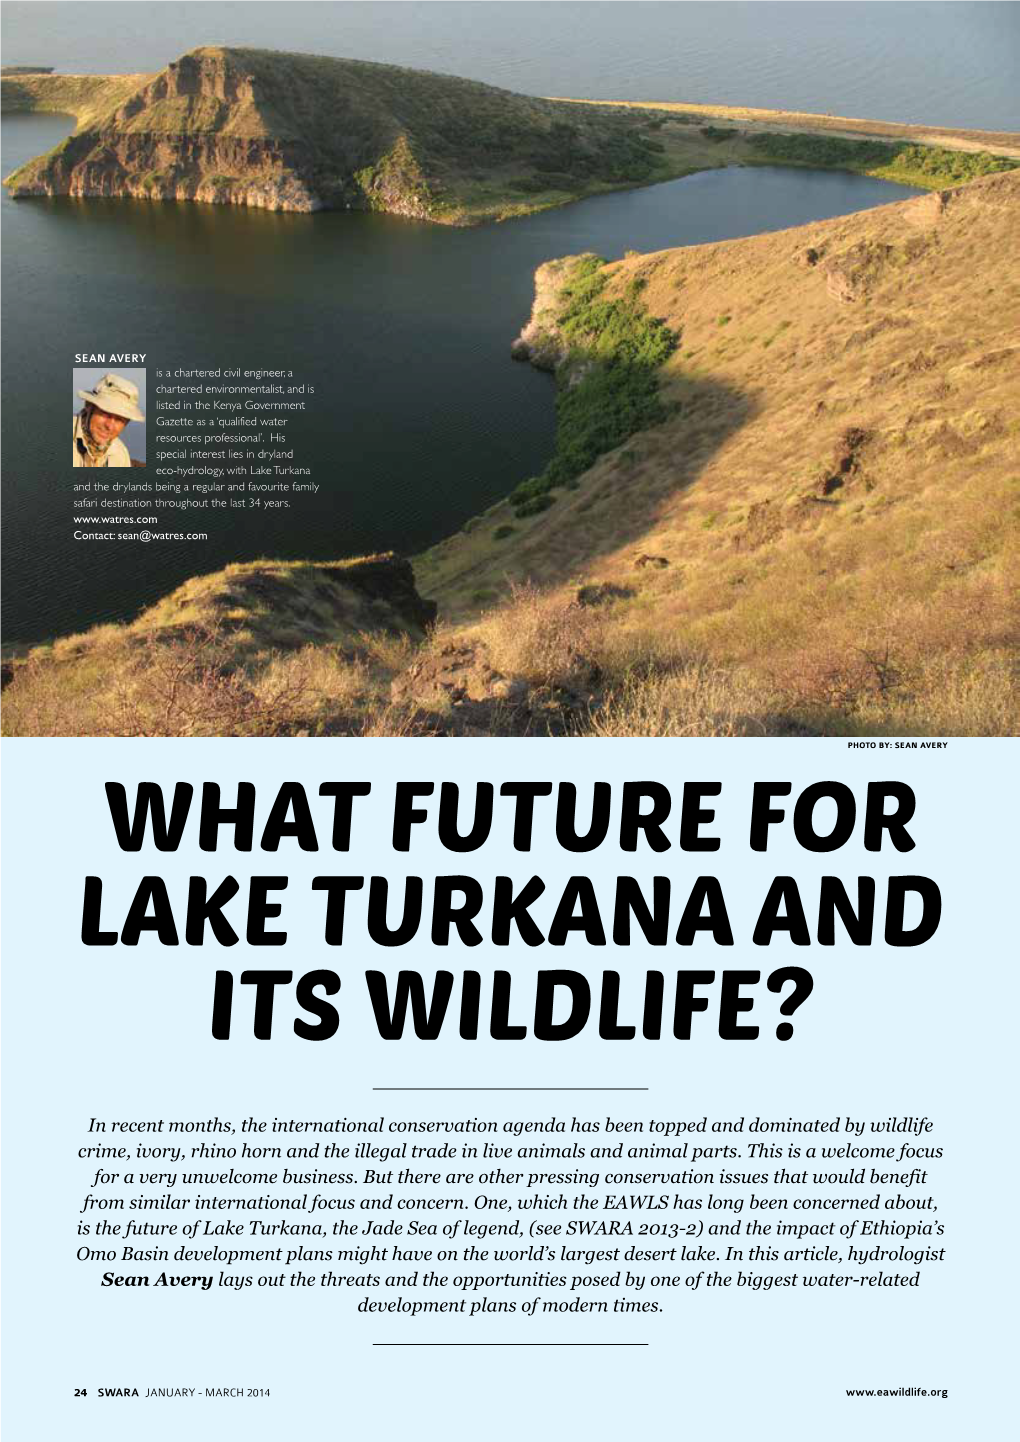 What Future for Lake Turkana and Its Wildlife?